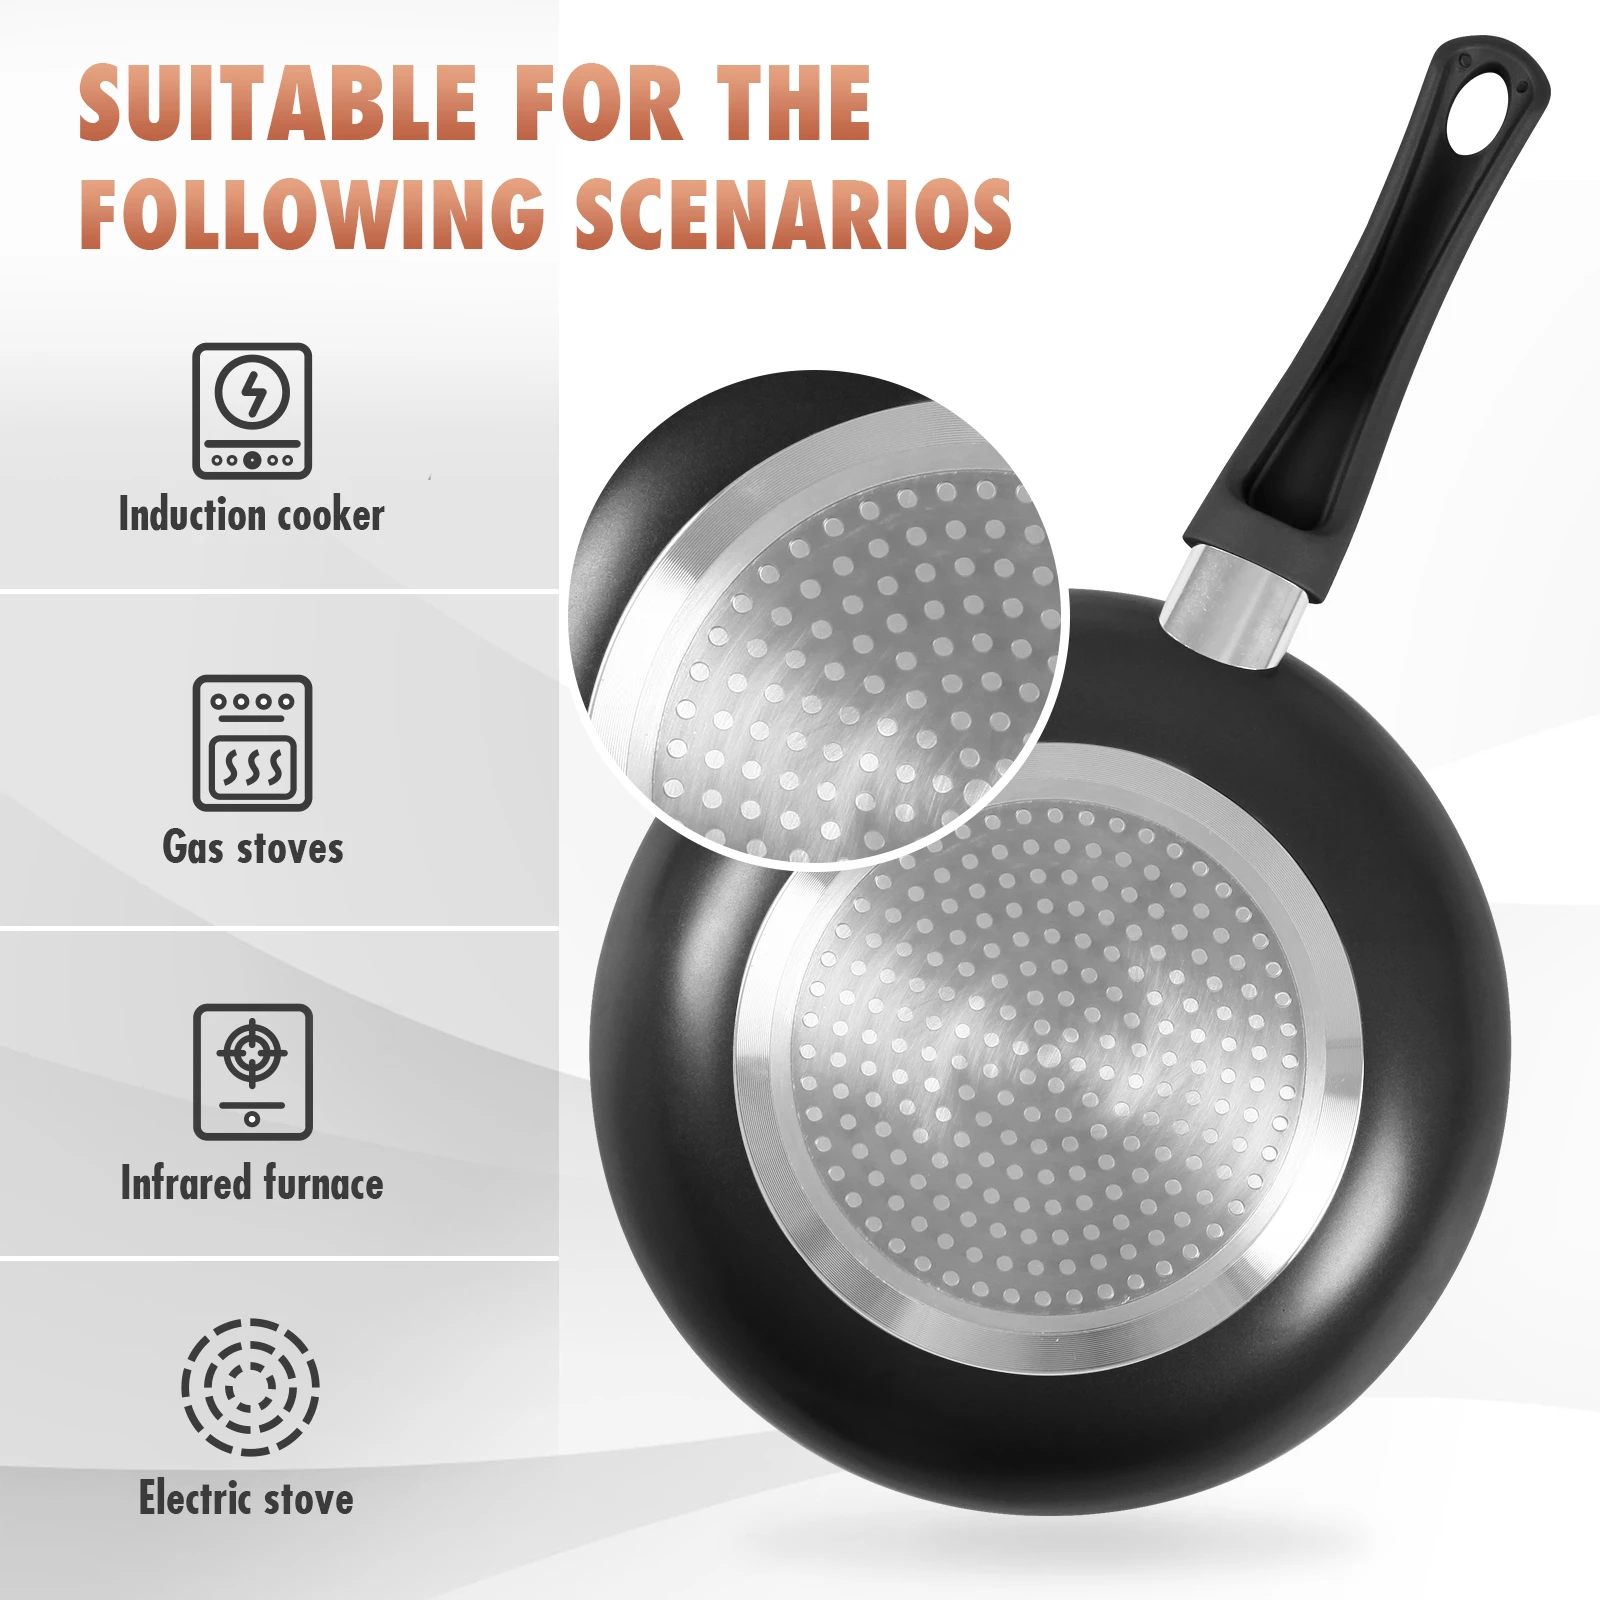 7Set Nonstick Pots, Pans and Spatula - LINKLIFE Non-Stick Frying Pan Sets